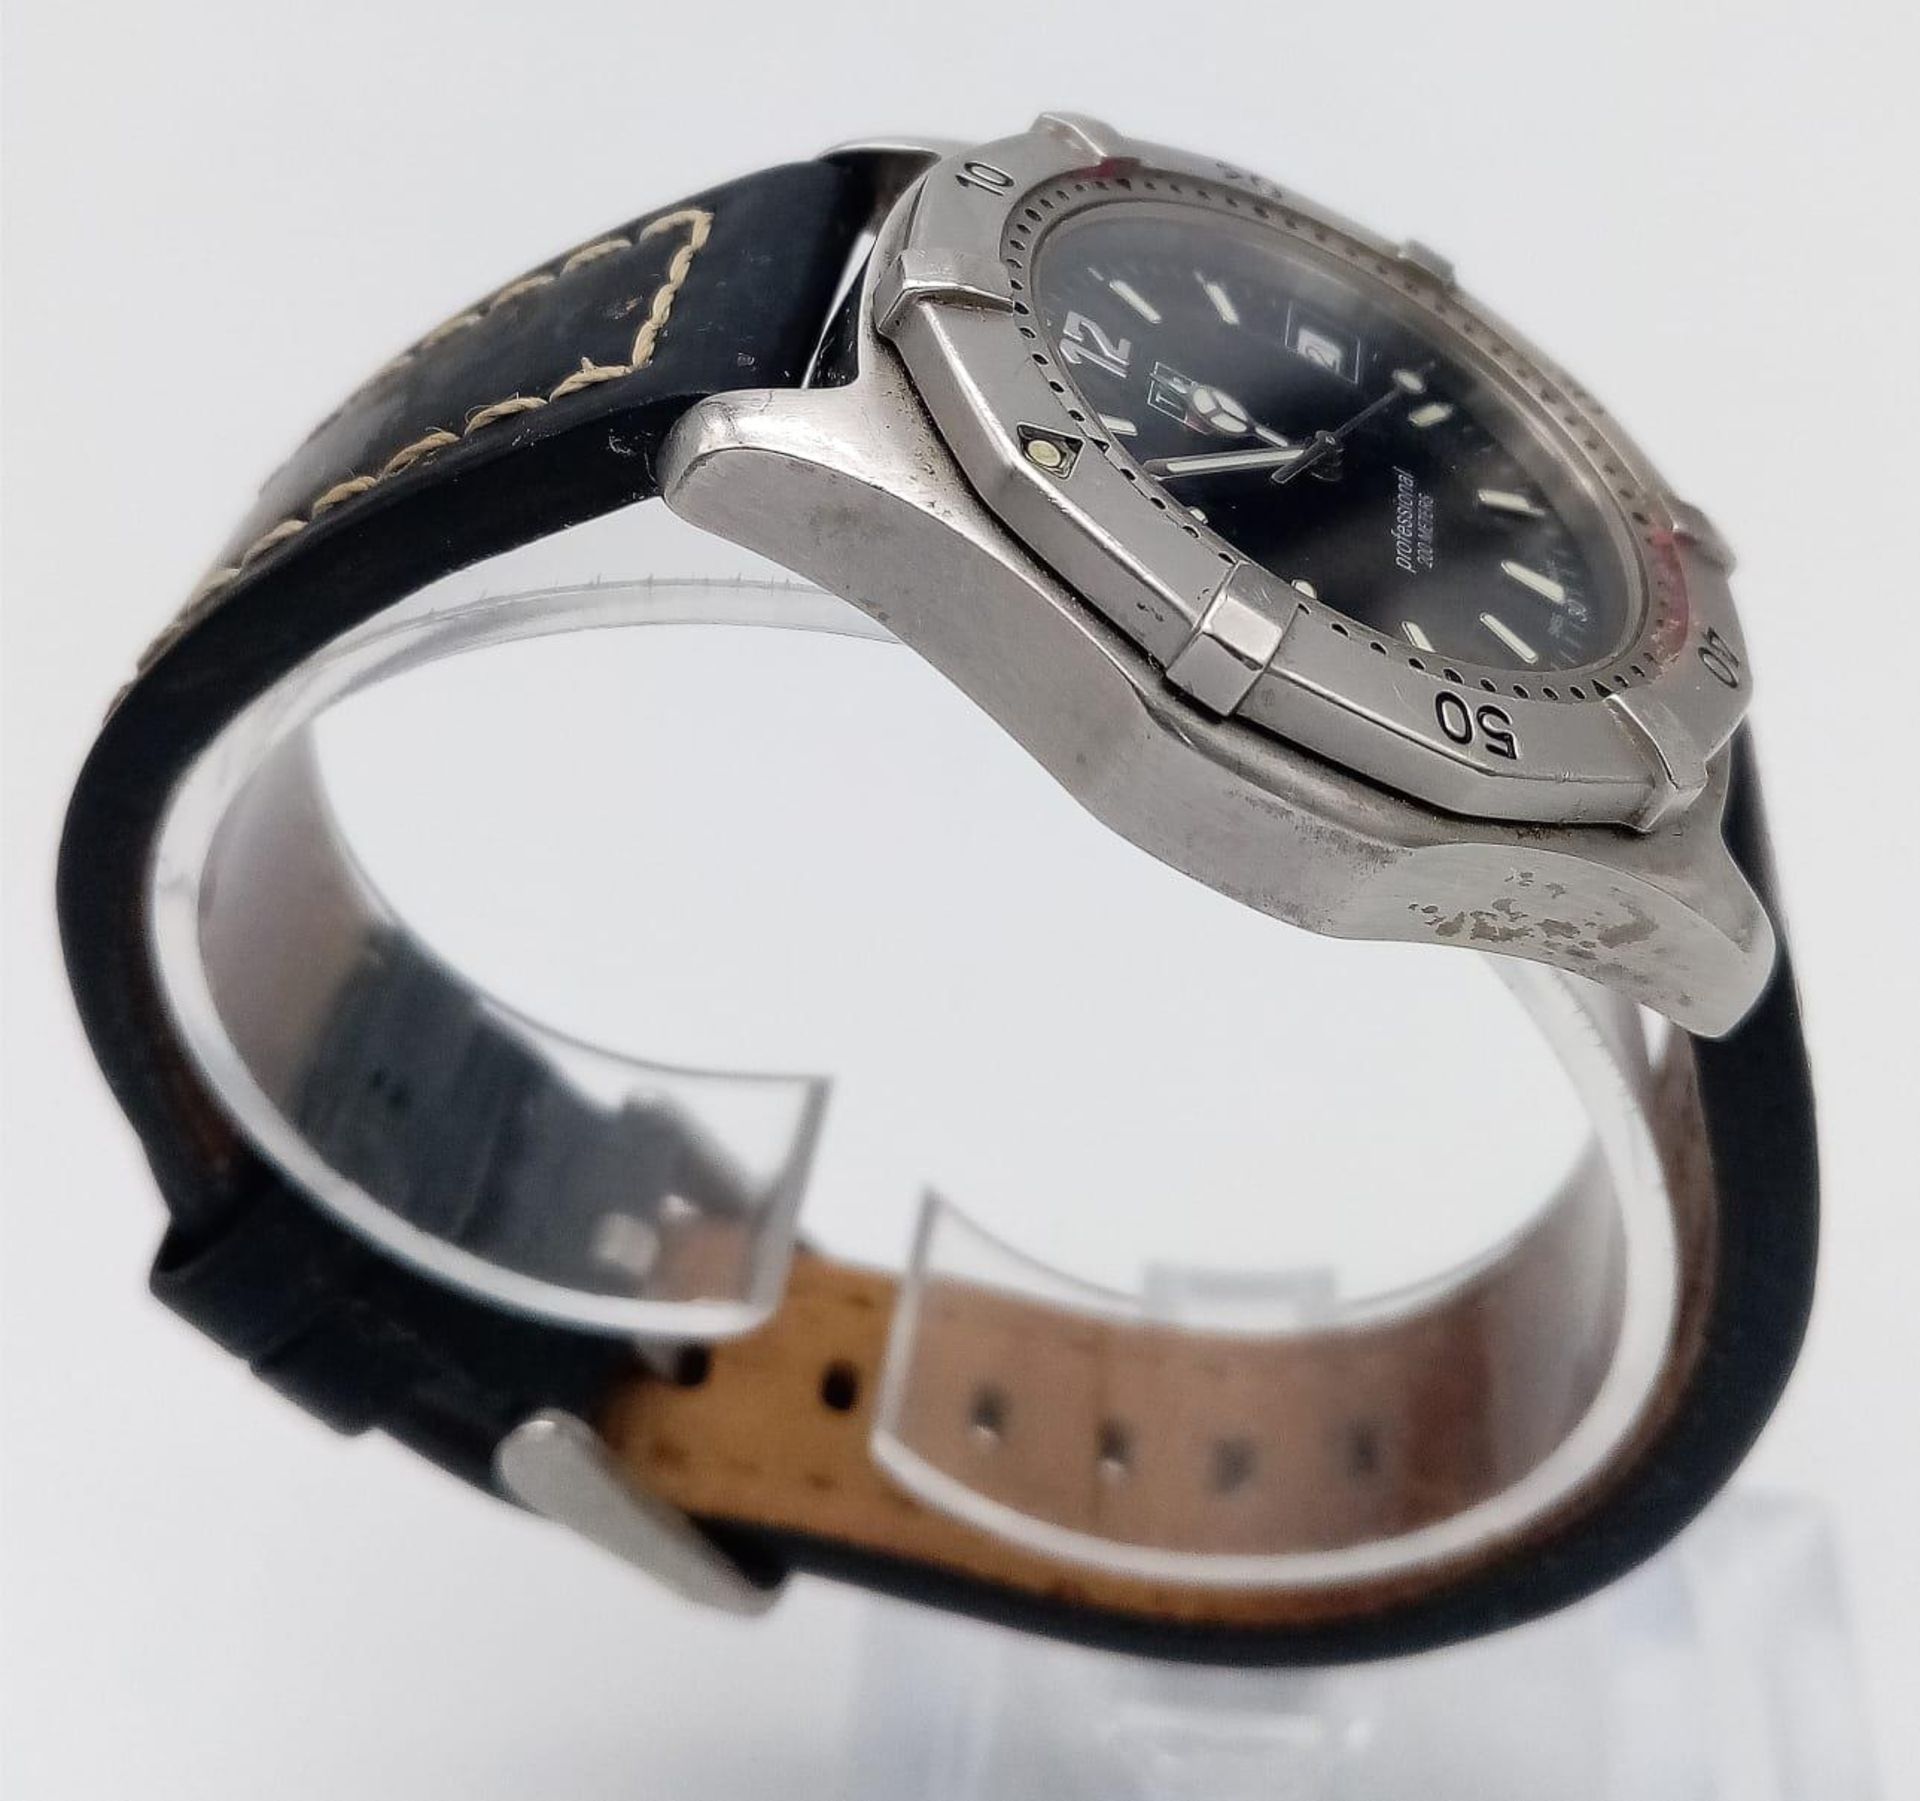 A TAG HEUER "PROFESSIONAL" 200 METERS DIVERS WATCH QUARTZ MOVEMENT . 36mm 15849 - Image 4 of 8